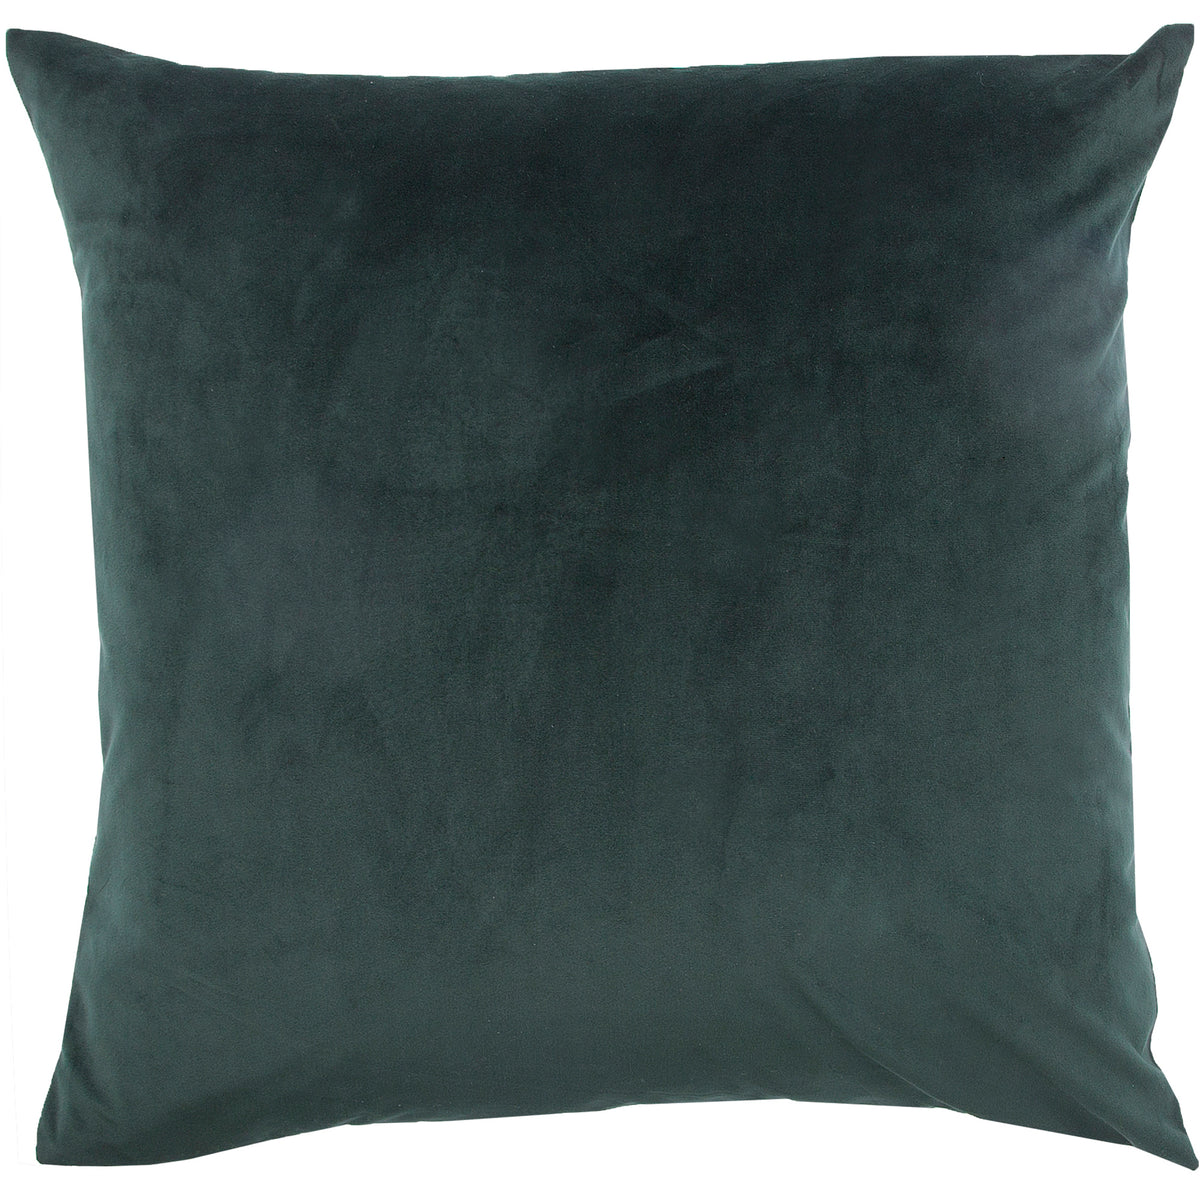 Bengal Dark Olive & Linen Feather Filled 20x20 Cushion